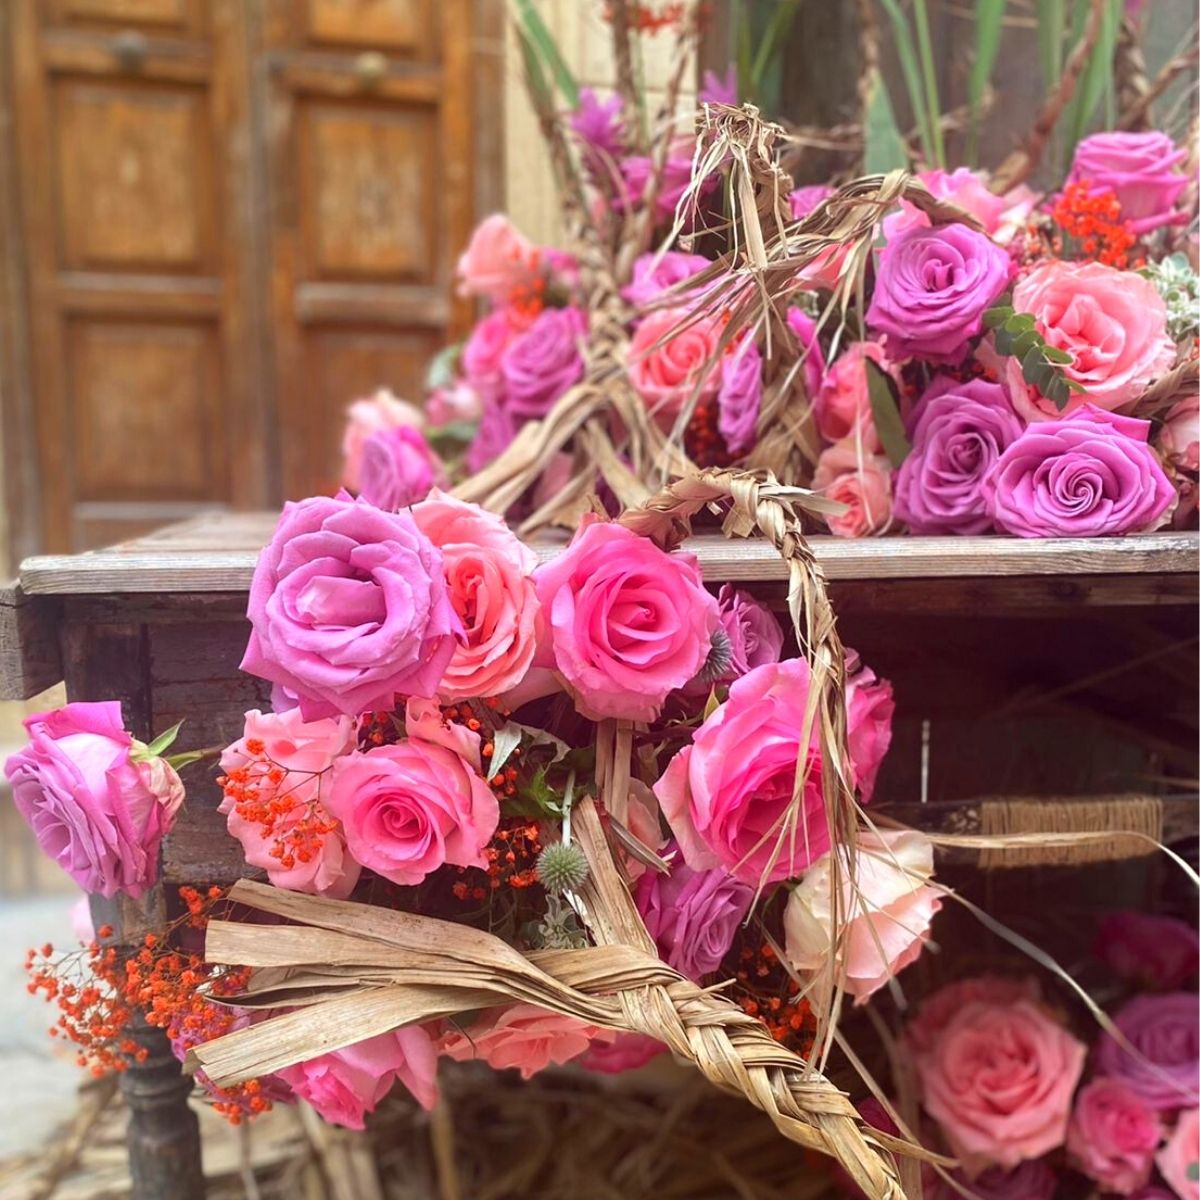 naranjo-roses-pop-up-at-arteflorando-in-the-authentic-city-of-leverano-featured